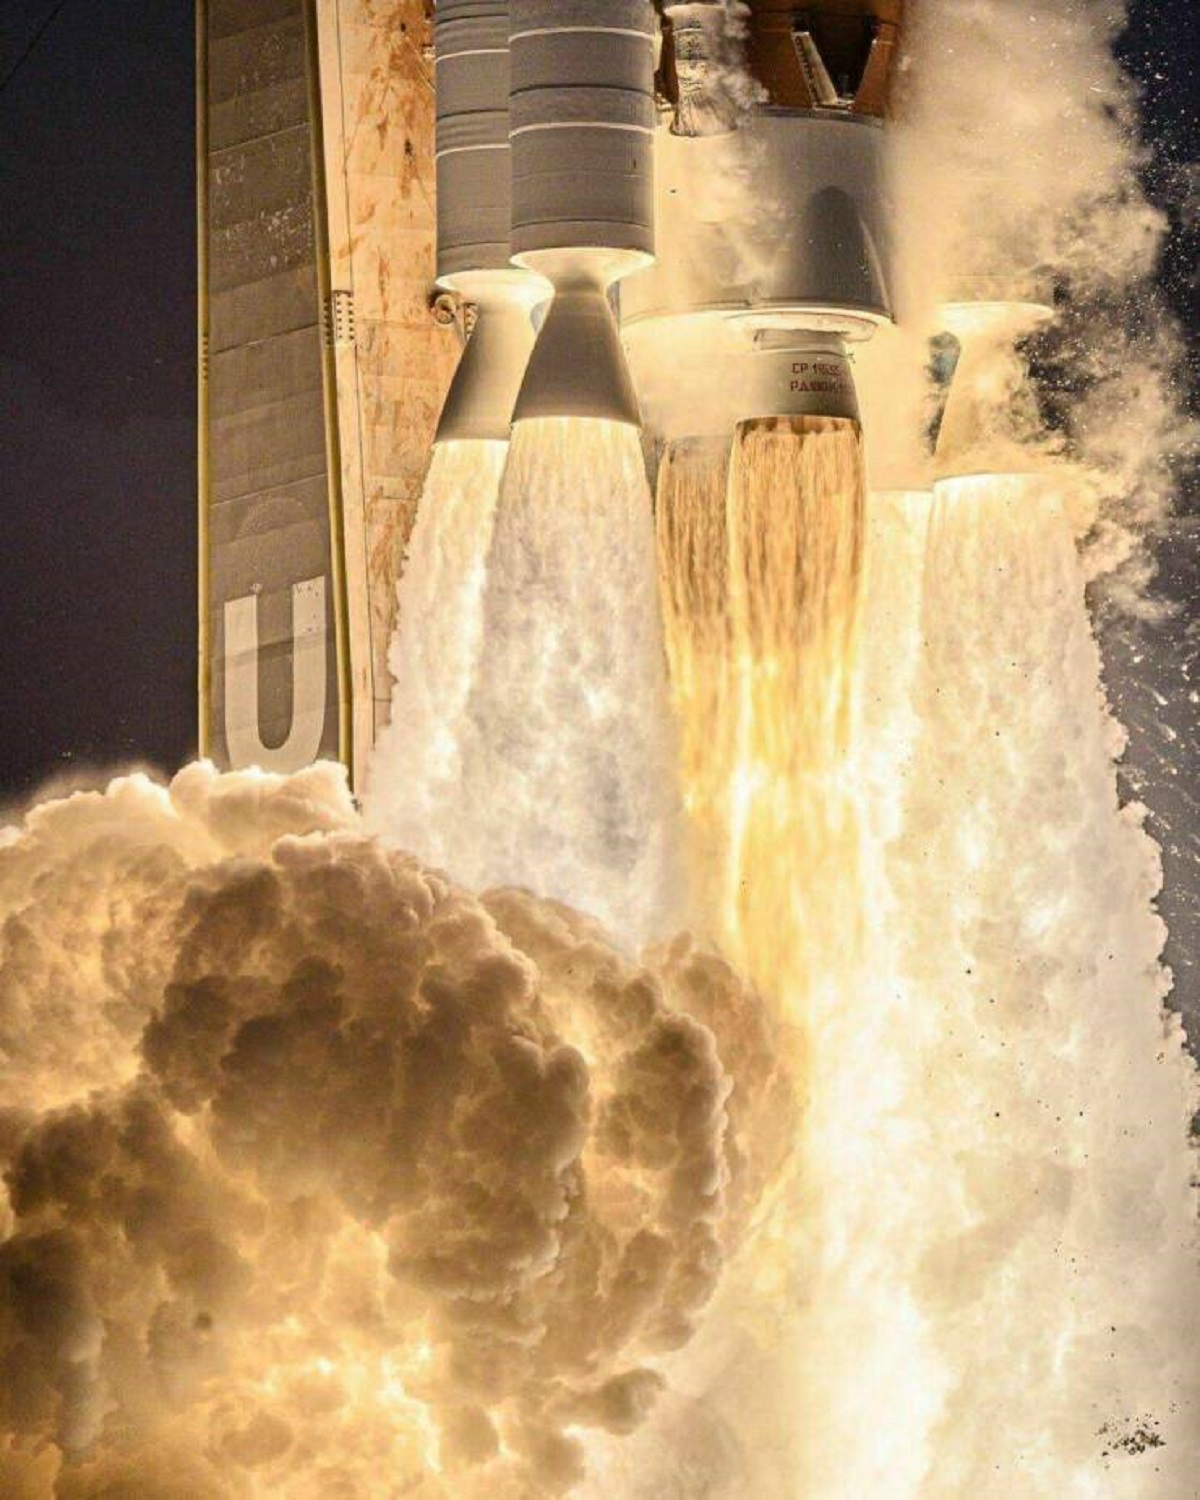 united launch alliance's atlas v rocket thunders off the pad with ussf 12 july 2022 a john kraus photo - A Cp 19 Pan